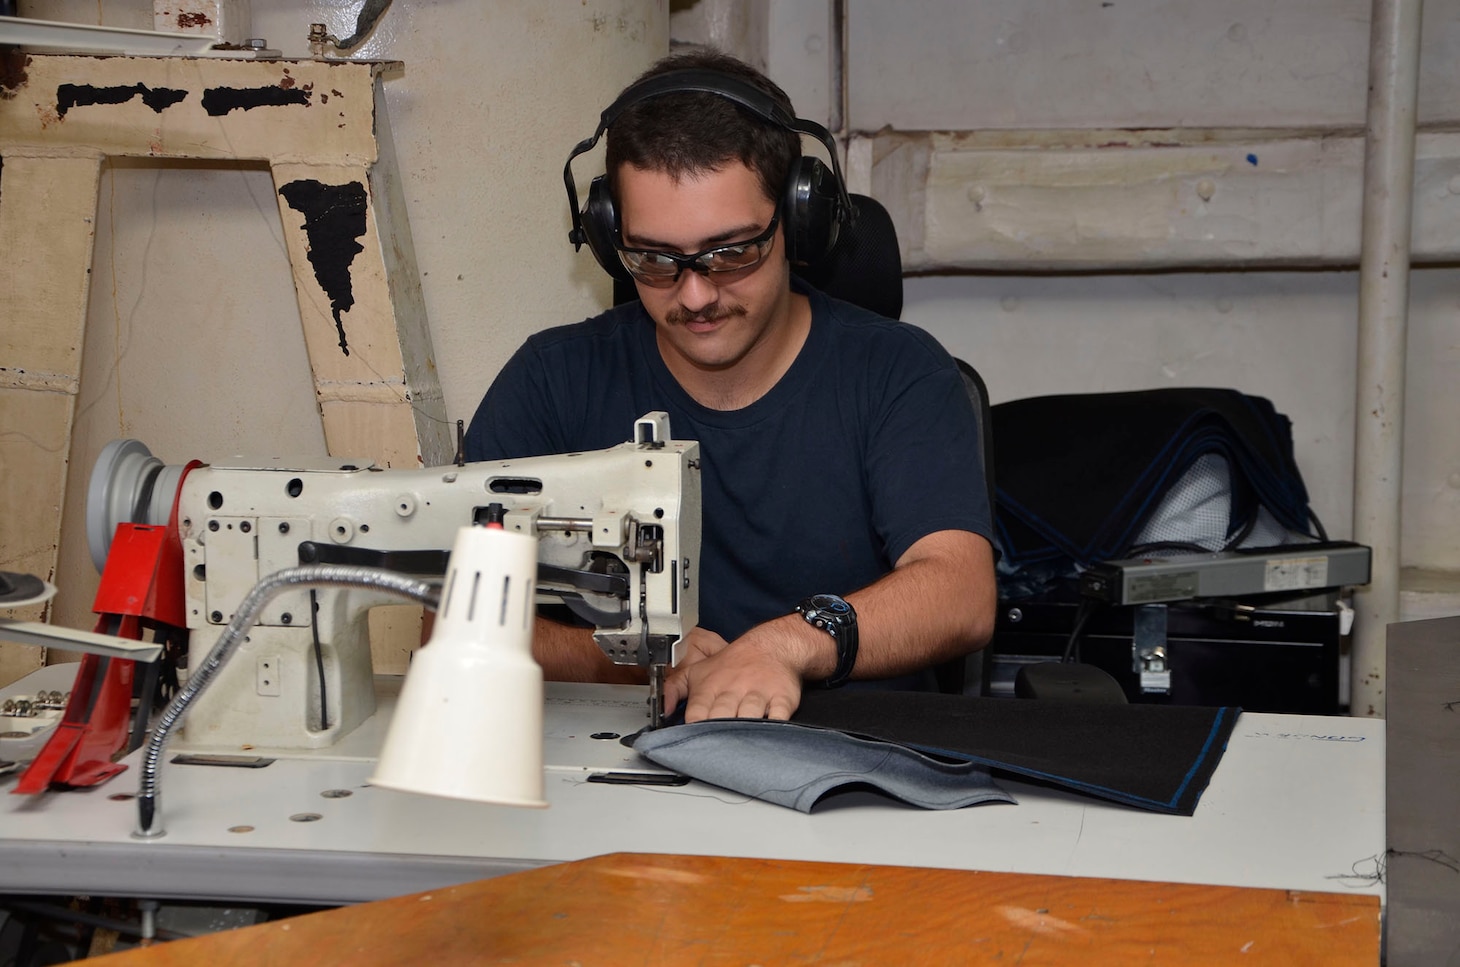 160119-N-VH871-006 DIEGO GARCIA, British Indian Ocean Territory (Jan. 19, 2016) Hull Repair Technician Fireman Zachary James assigned to the submarine tender USS Emory S. Land (AS 39) sews together pieces of Naugahyde to make a seat cover for the guided missile submarine USS Florida (SSGN 728) as part of a continuous maintenance availability. Emory S. Land is a forward deployed expeditionary submarine tender on an extended deployment conducting coordinated tended moorings and afloat maintenance in the U.S. 5th and 7th Fleet areas of operations. (U.S. Navy photo by Mass Communication Specialist 3rd Class Austin L. Ingram/Released)